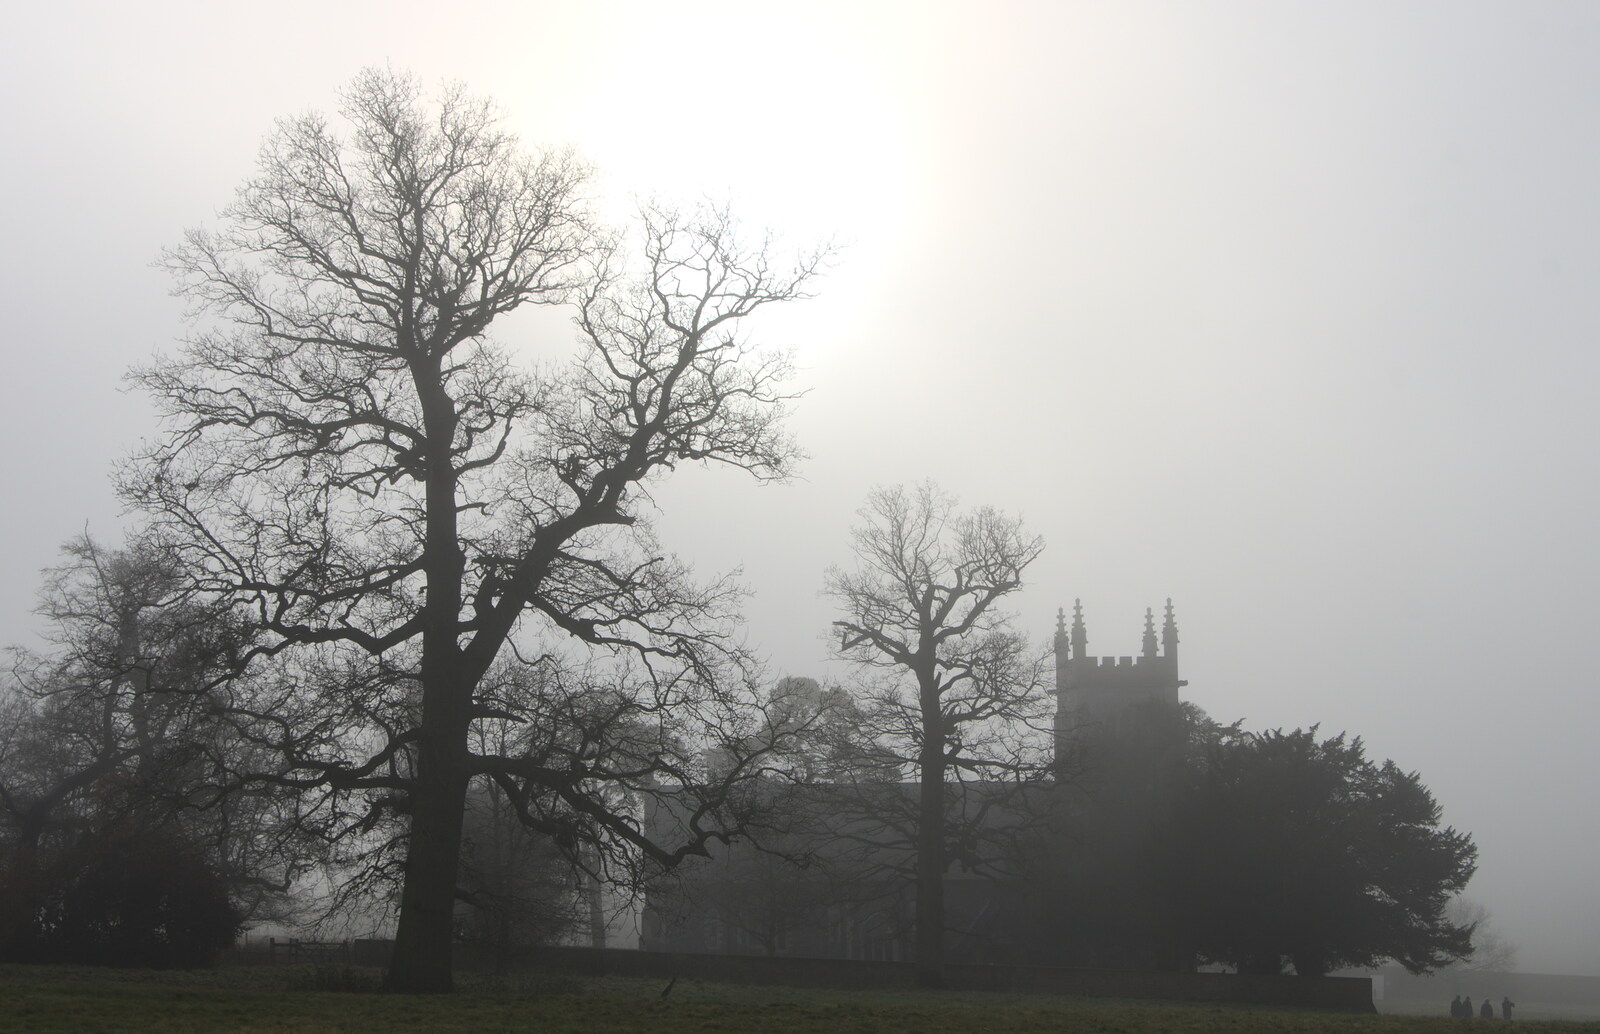 The feeble sun and a hazy church from A Trip to Ickworth House, Horringer, Suffolk - 30th December 2016